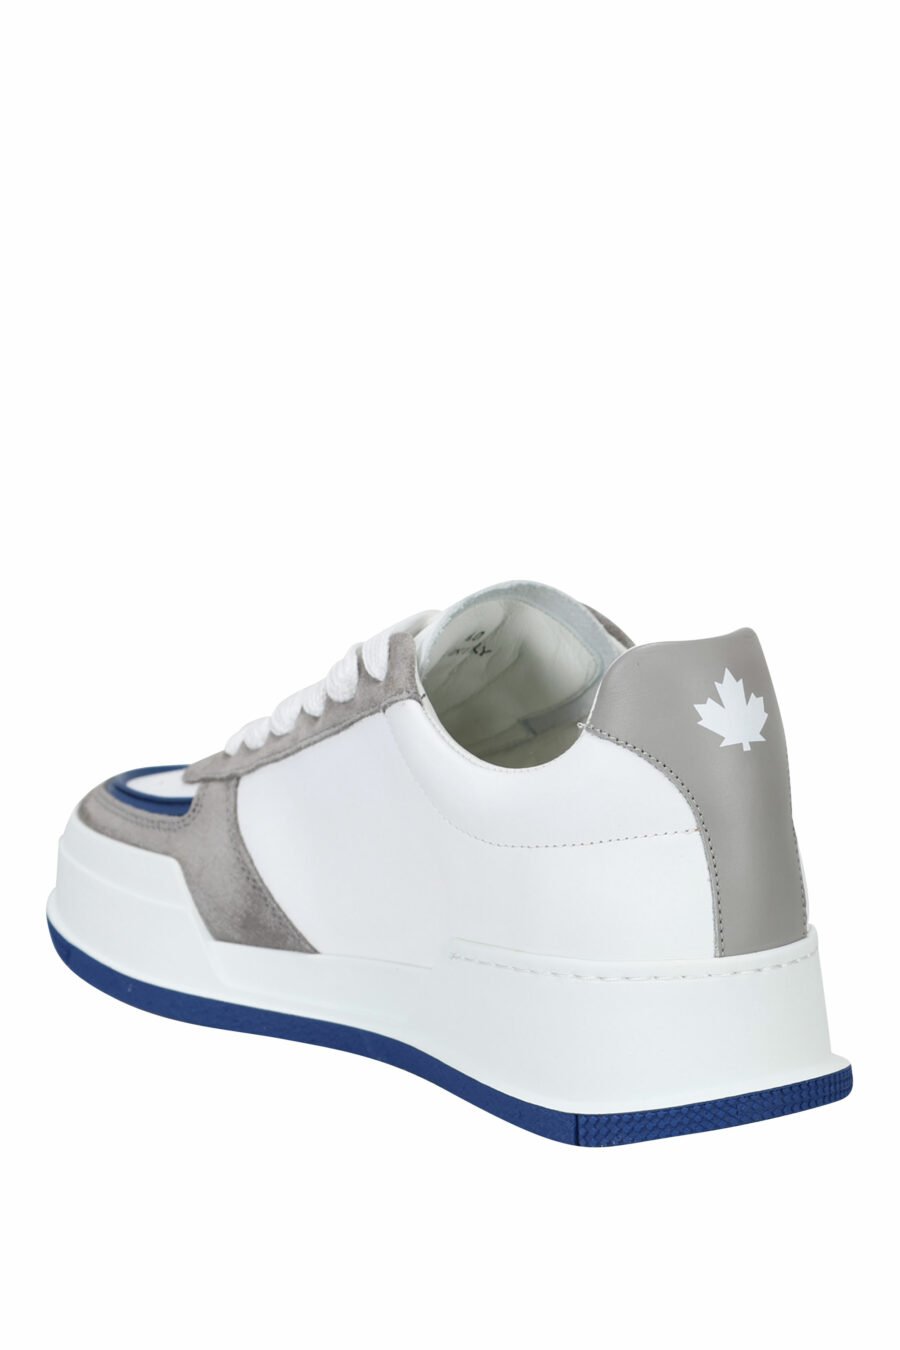 White trainers mix with grey, blue and red leaf logo - 8055777242216 3